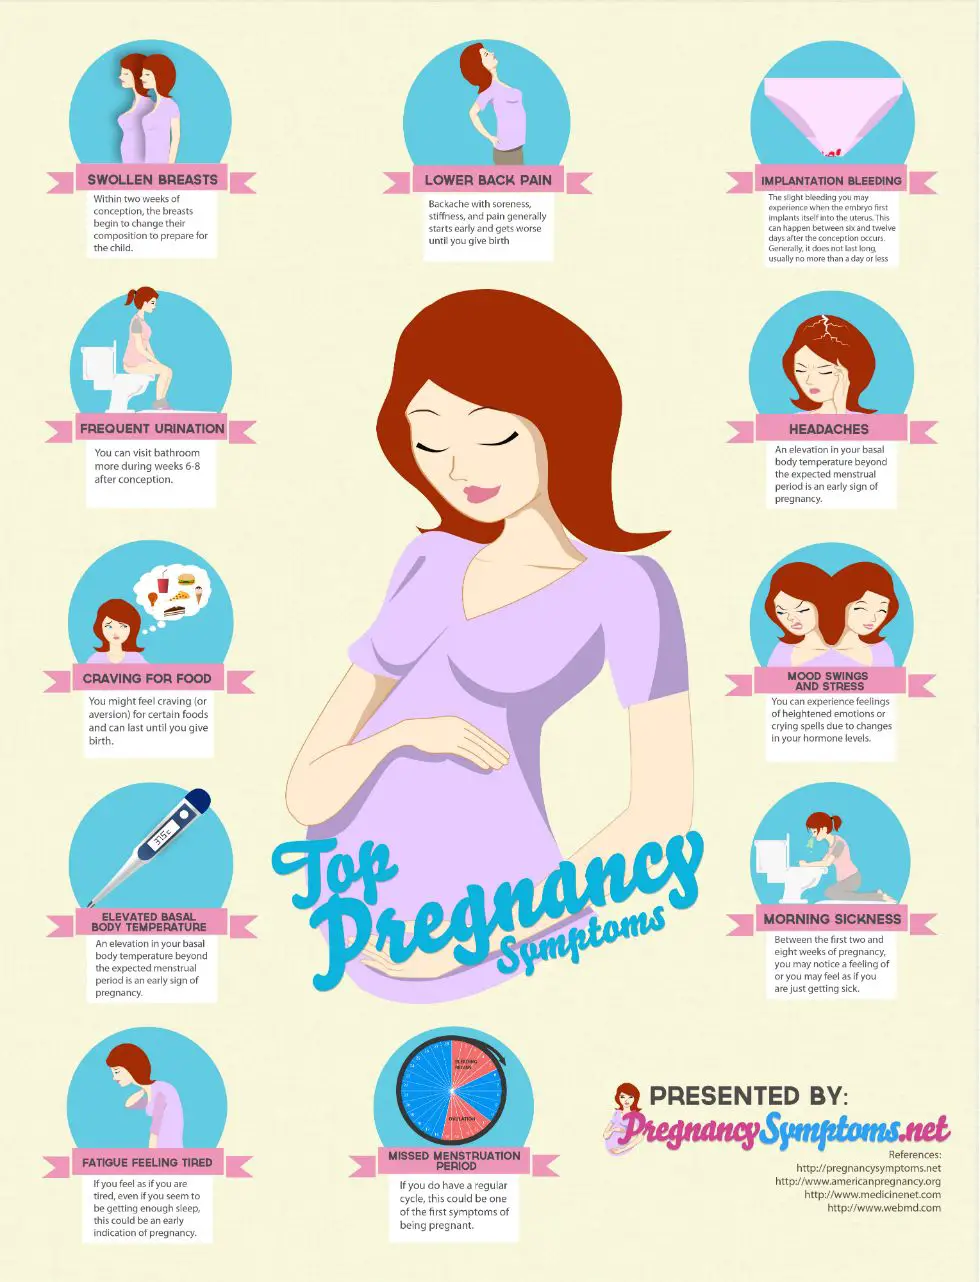 Unusual Pregnancy Symptoms: 18 Signs That May Surprise You